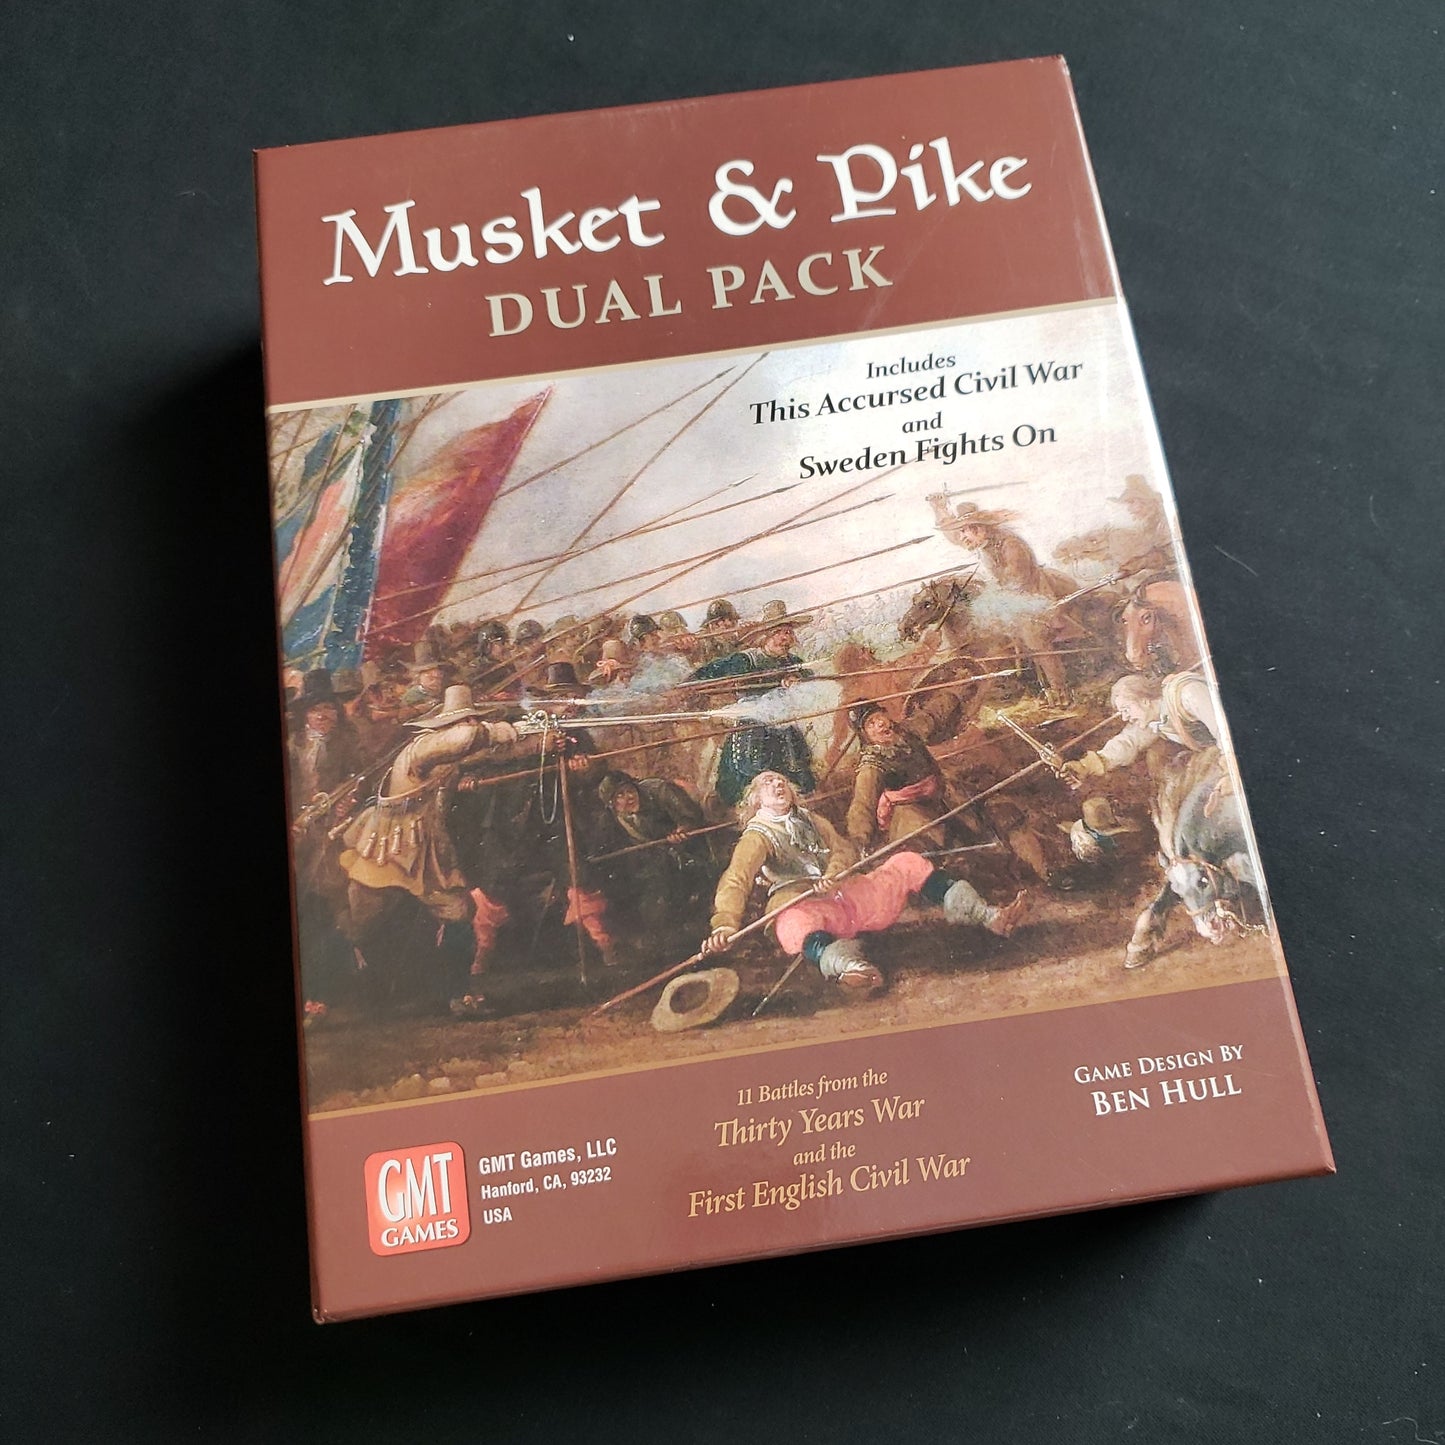 Image shows the front cover of the box of the Musket & Pike Dual Pack board game